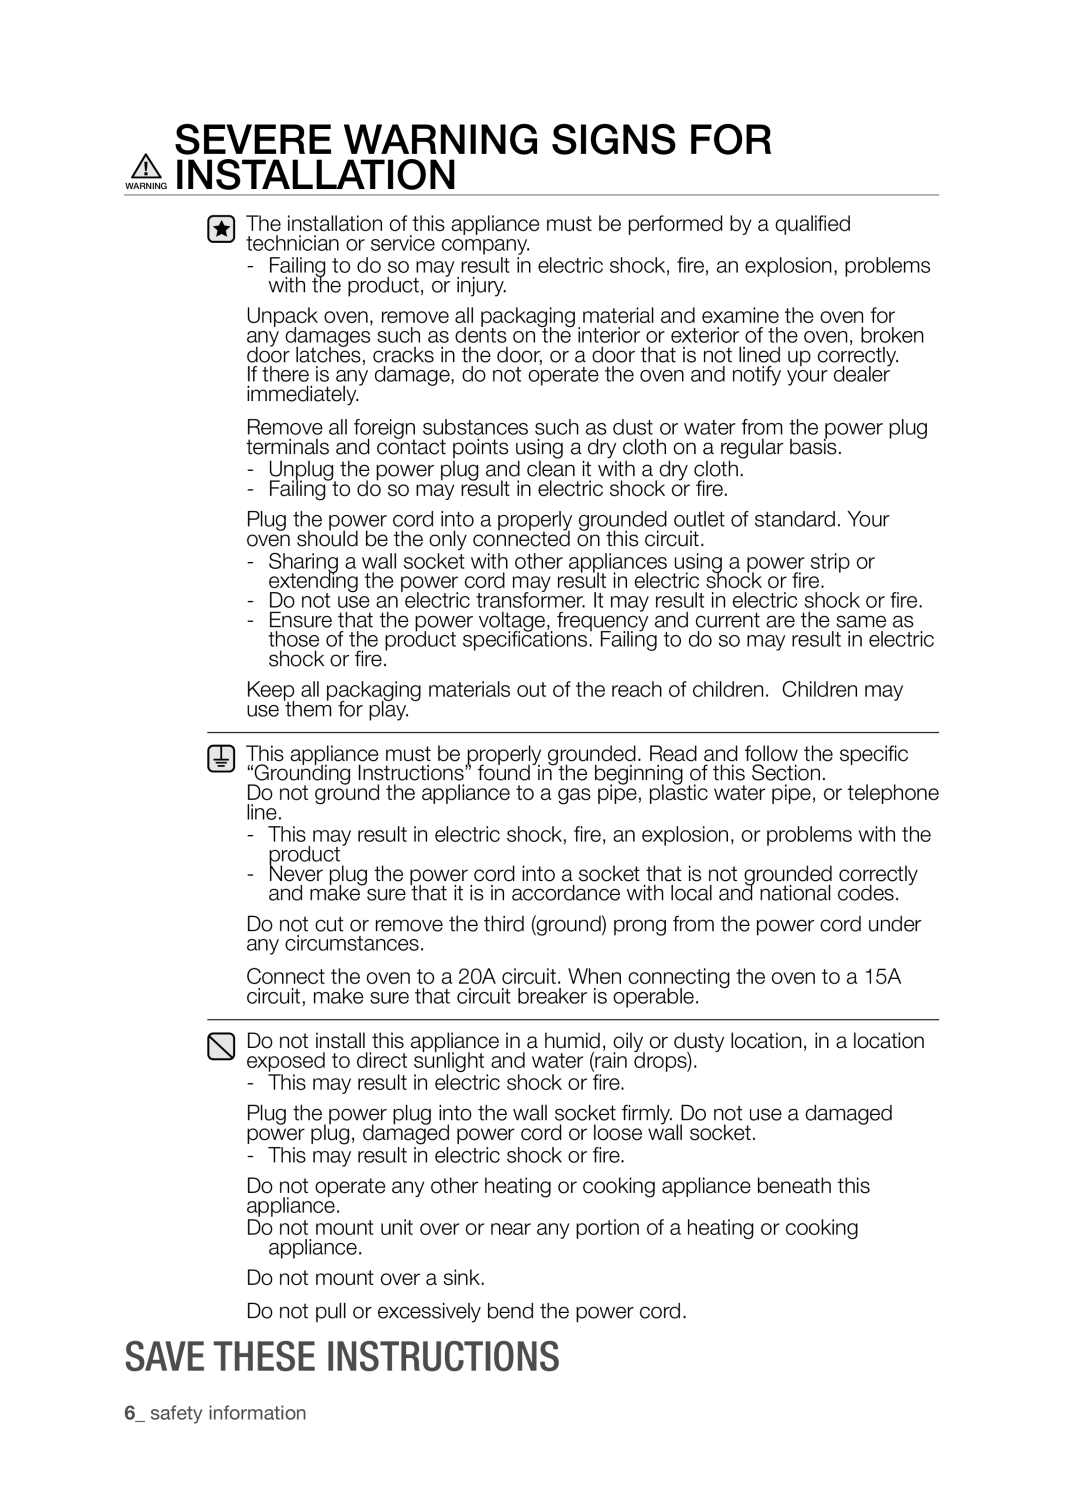 Samsung SMH9207ST user manual Severe Warning Signs For Warning Installation, Save these instructions, safety information 